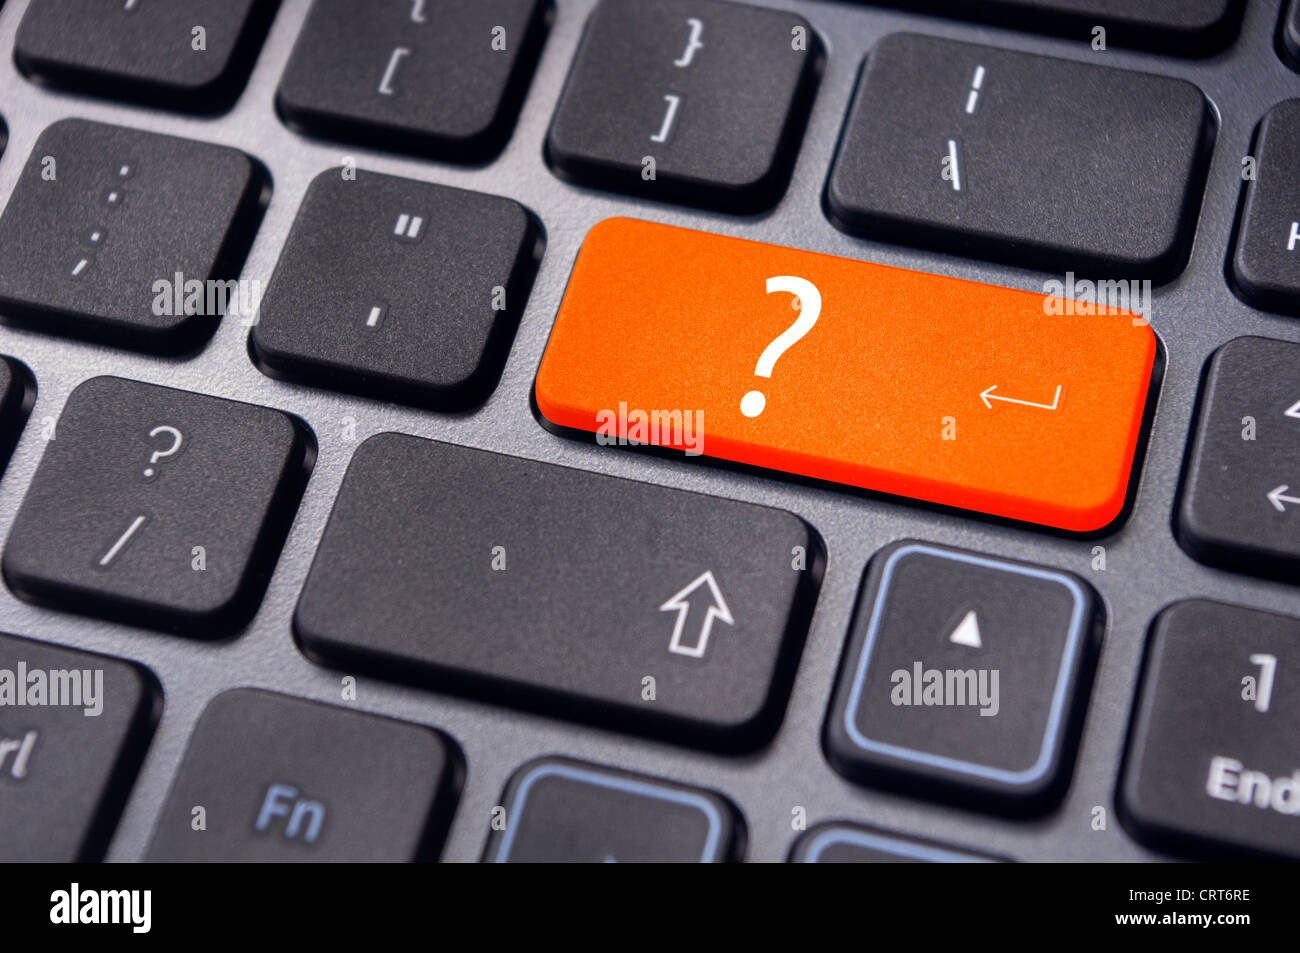 concepts of questions or computer errors, with a question on enter key of keyboard. Stock Photo